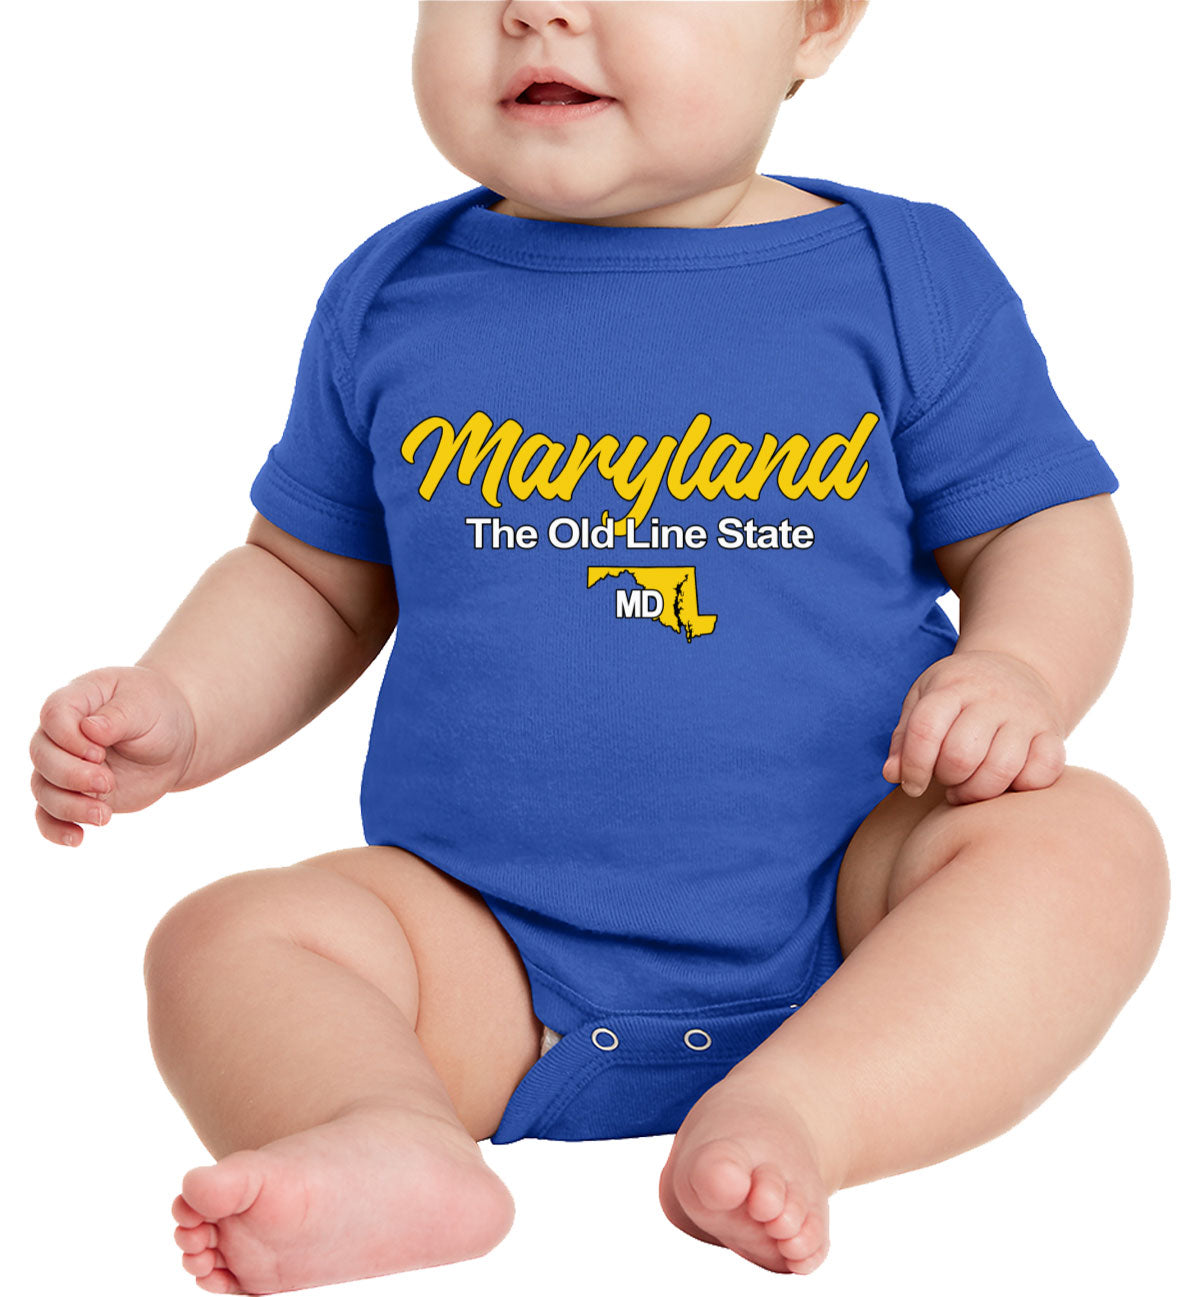 Maryland The Old Line State Baby Onesie